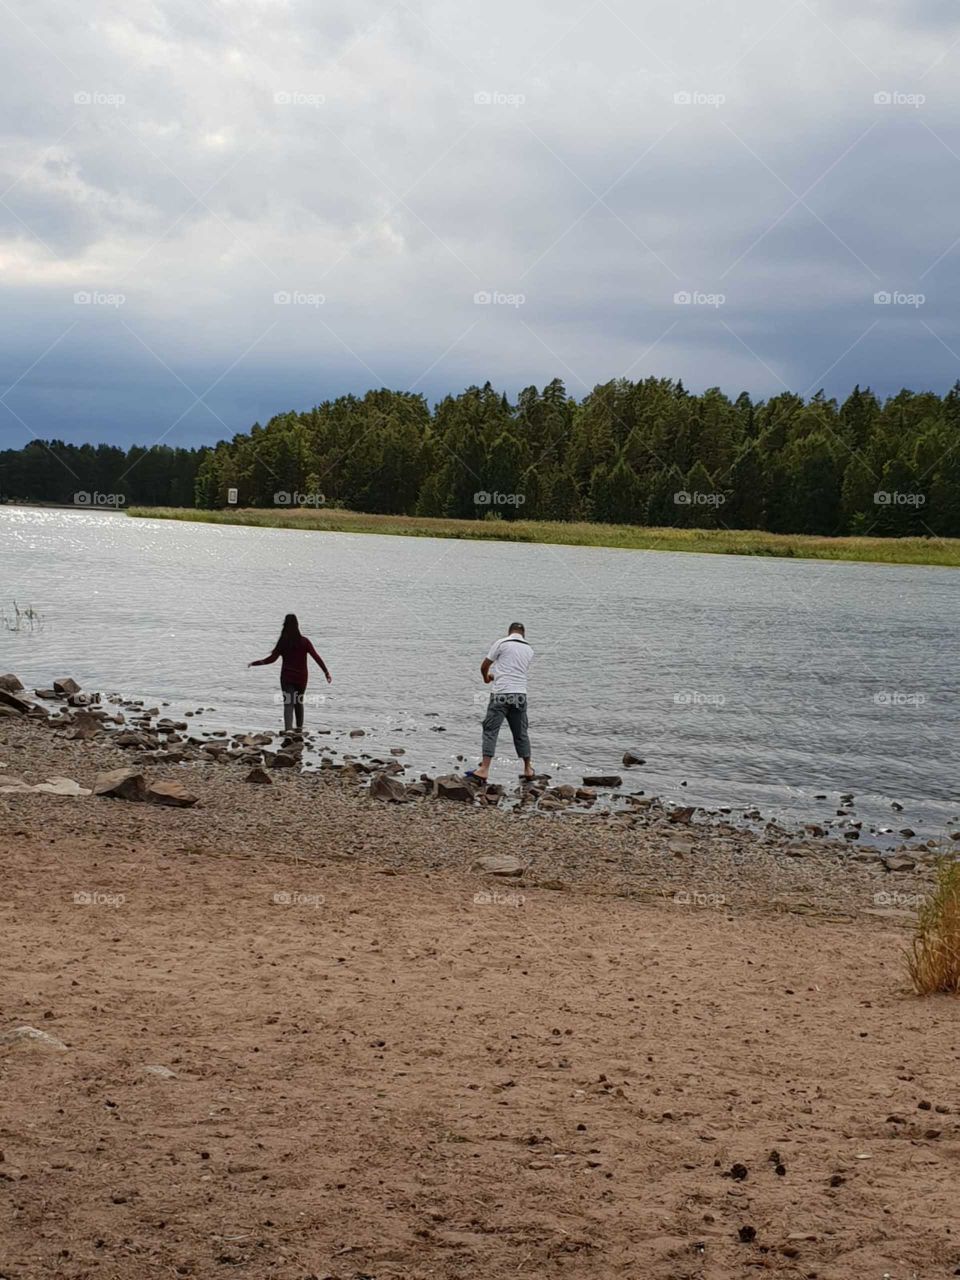 Two people throw stones at the lake.